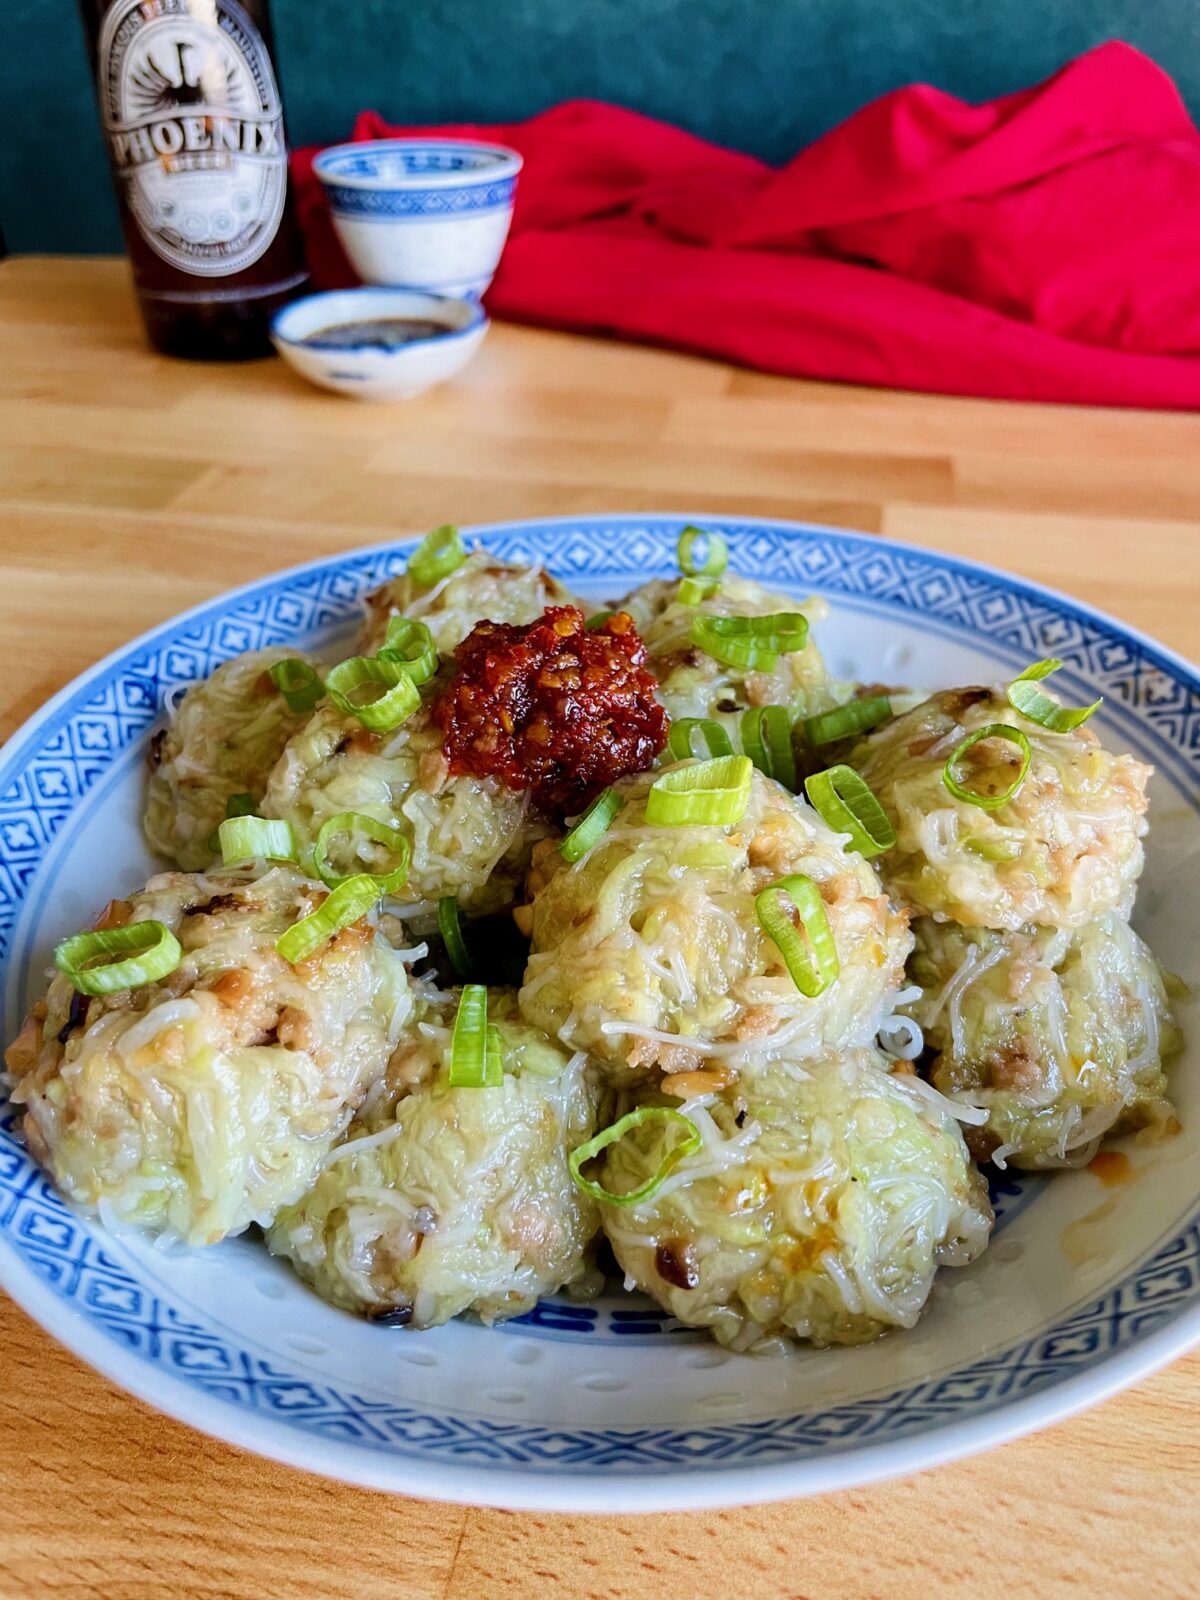 Boulette chouchou in plate topped with red chili paste and green onion. Bottle of Mauritian Phoenix beer in the background and mini Chinese bowls. Red cloth next to the bowls.